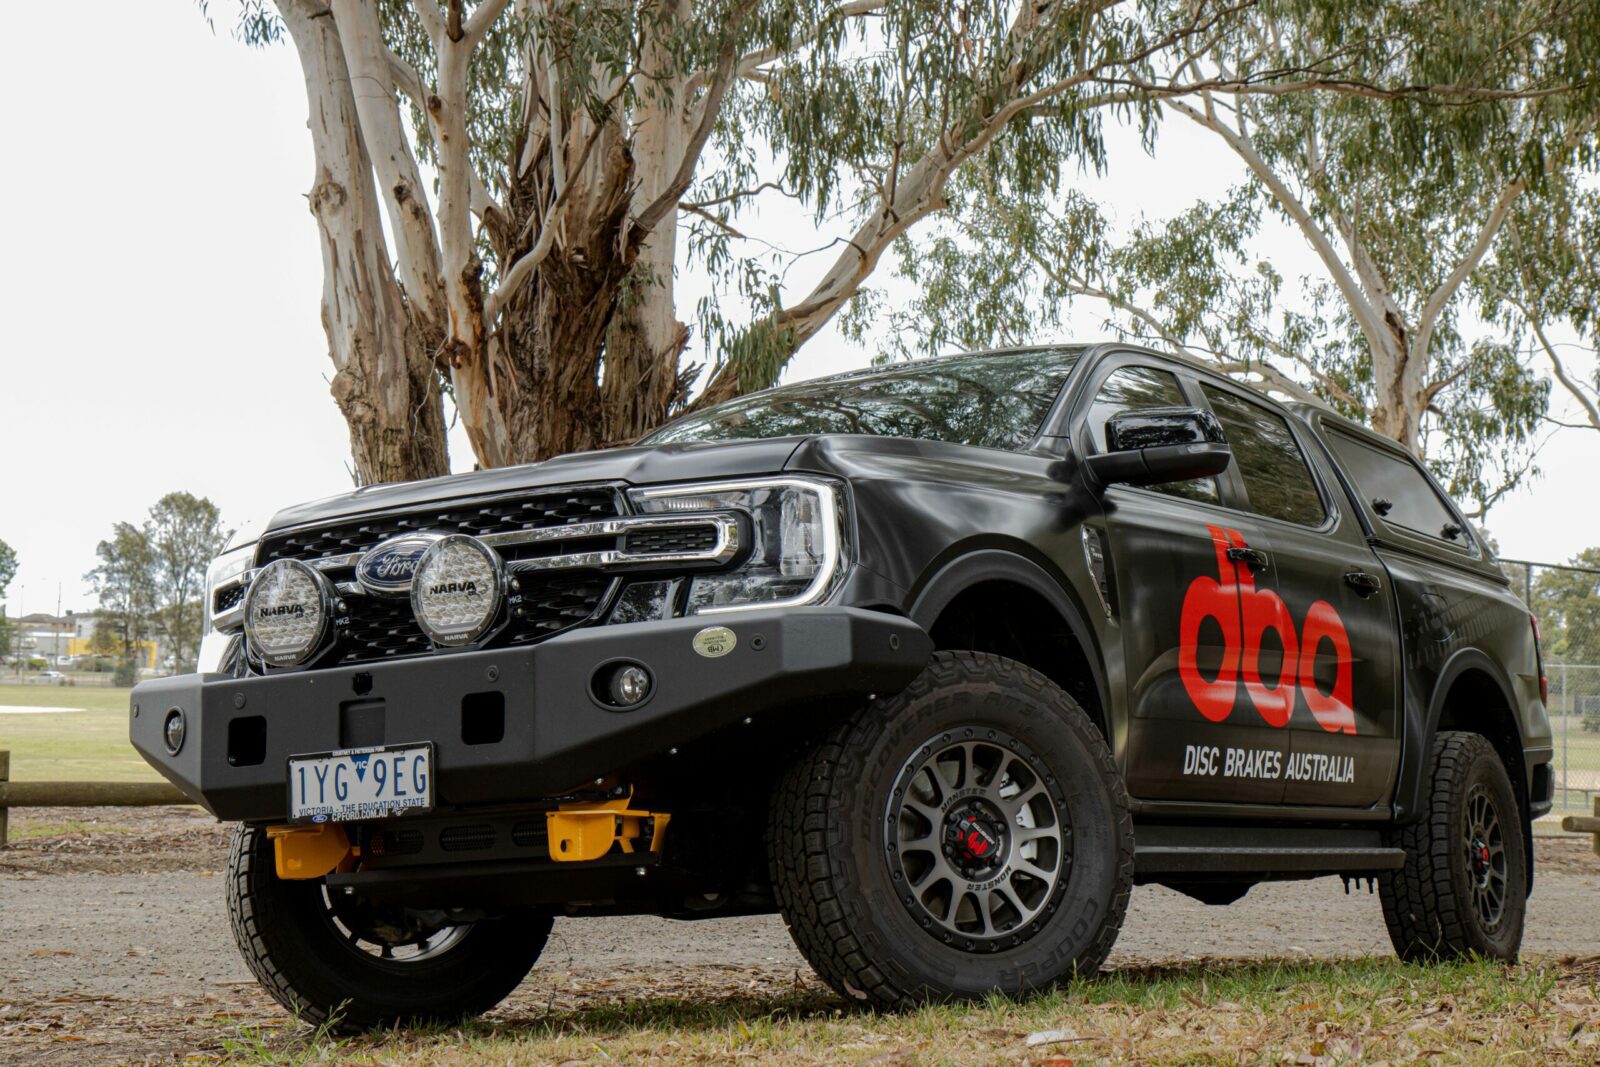 Ford Ranger with DBA decals applied to it.